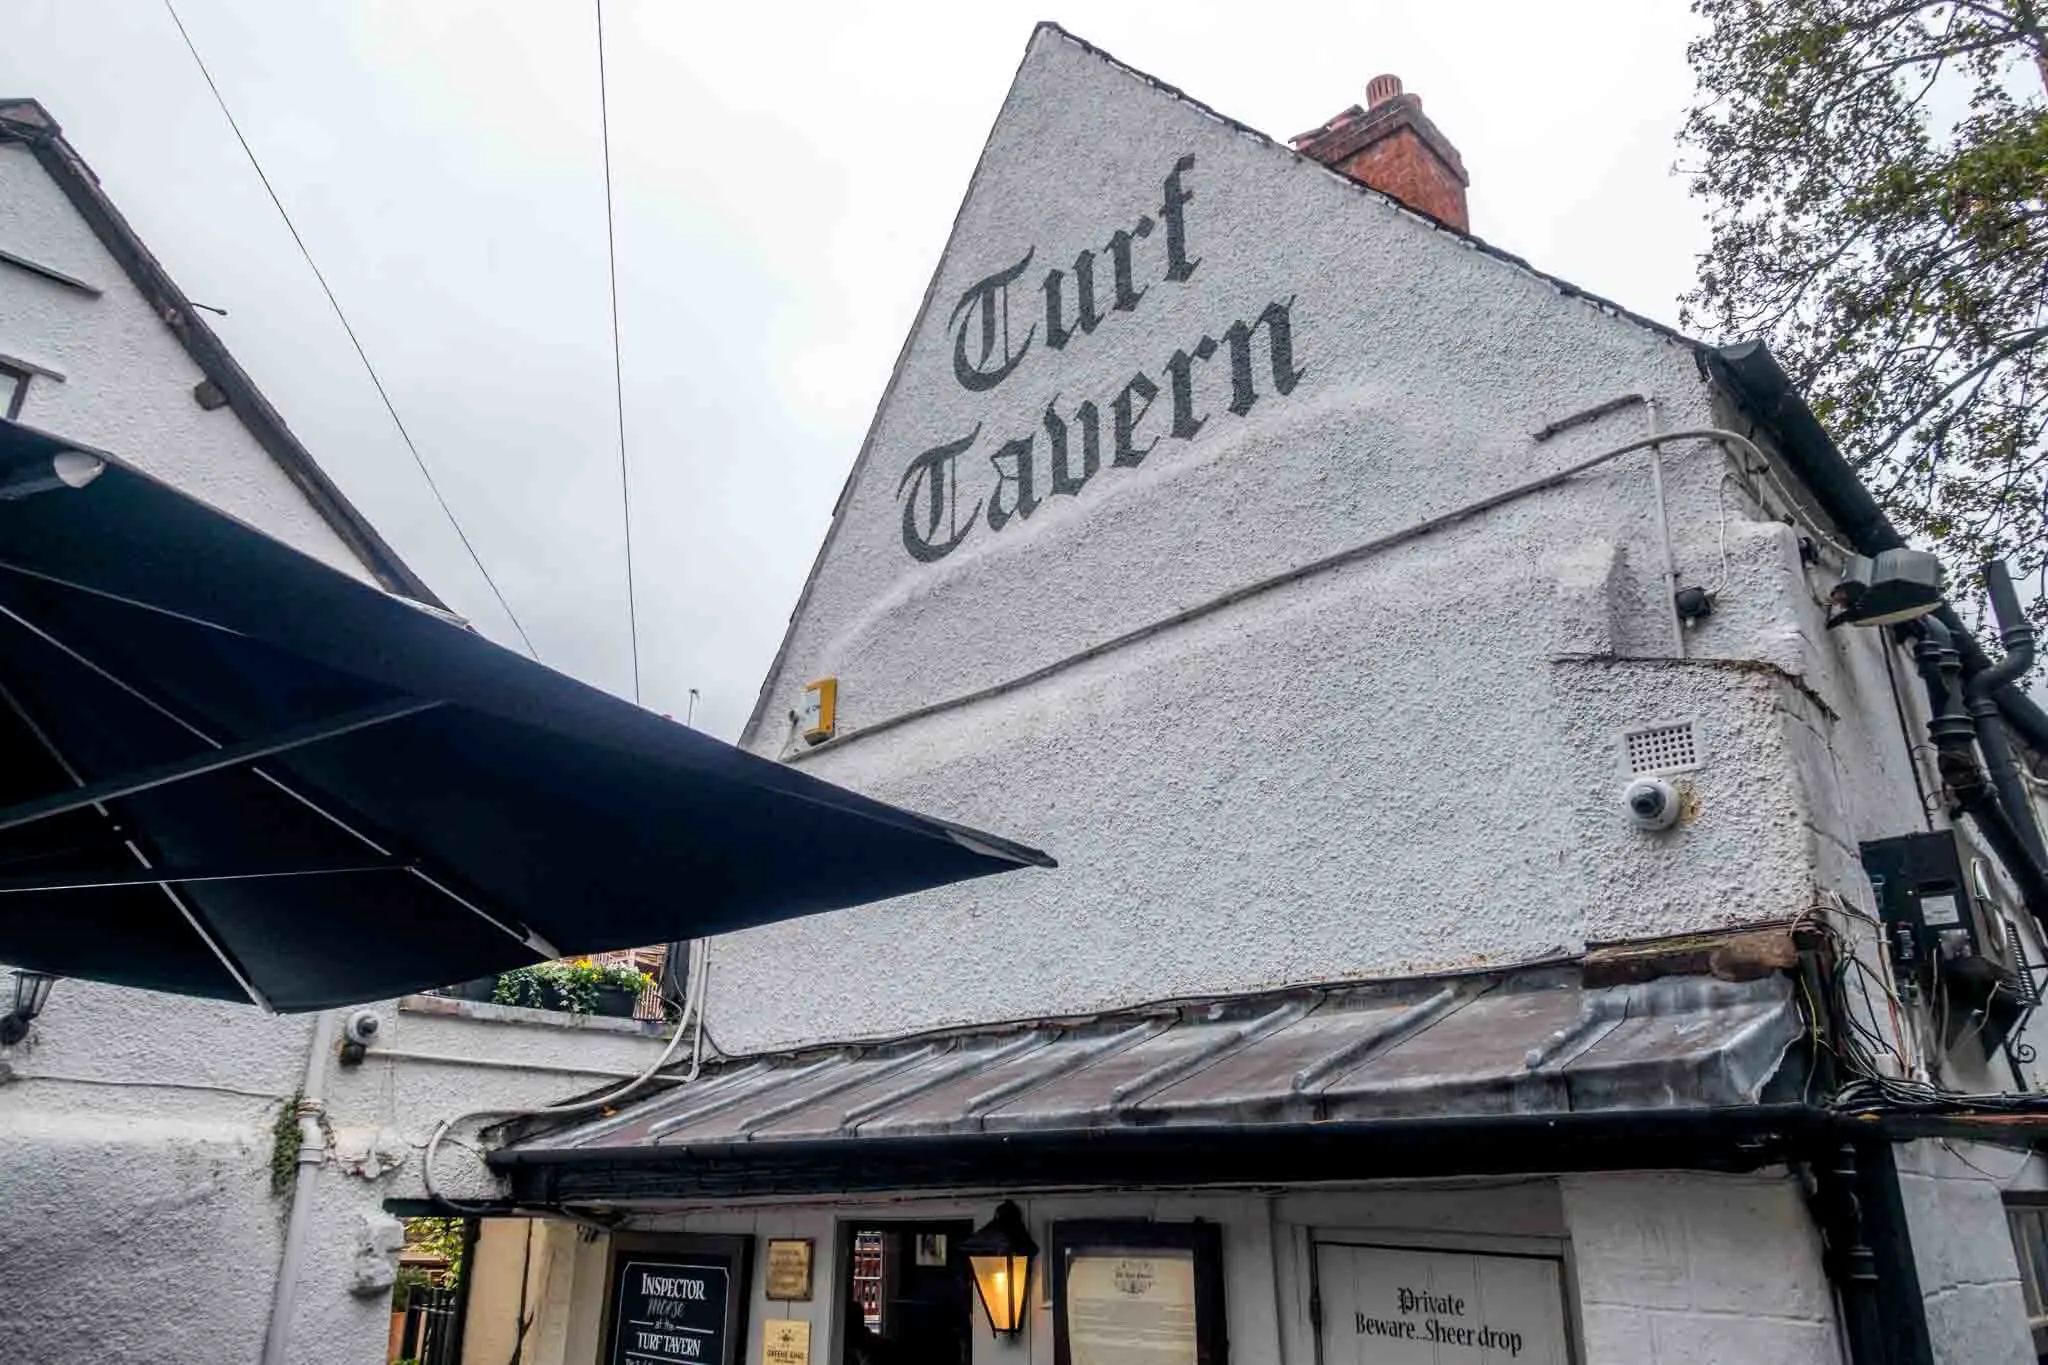 Exterior of a white stucco building with a black sign for Turf Tavern